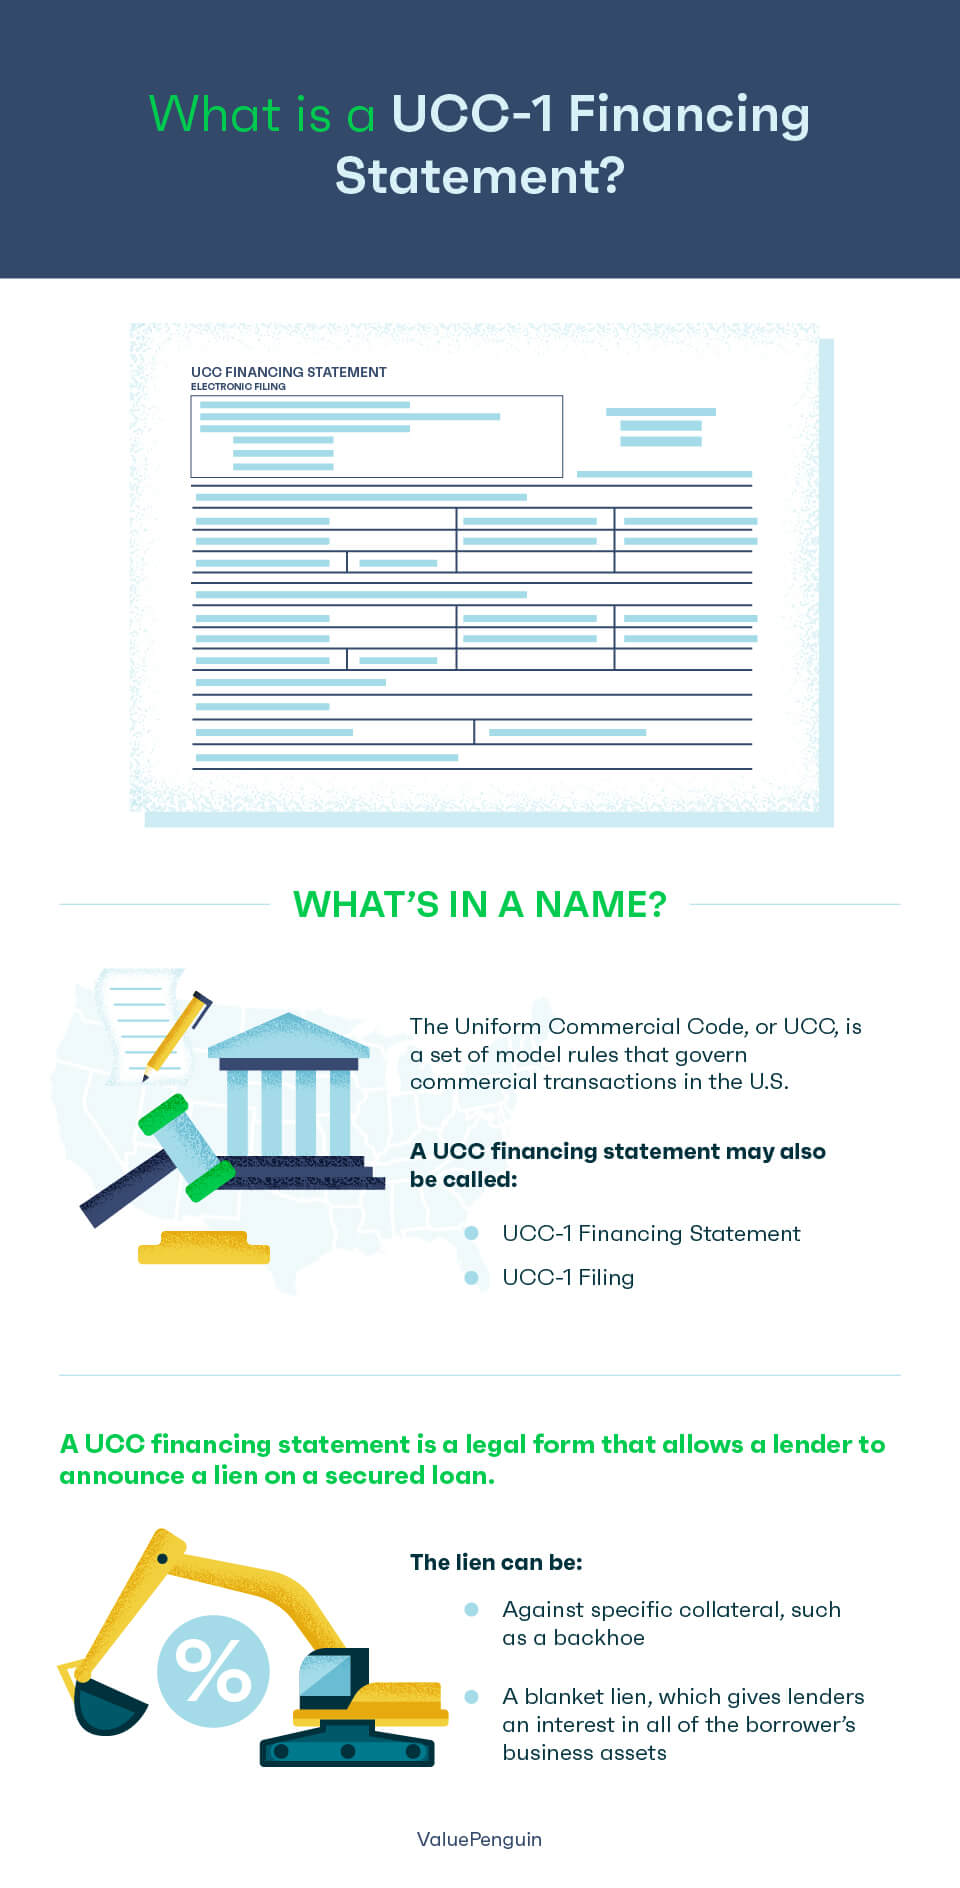 Infographic: What is a UCC-1 Financing Statement